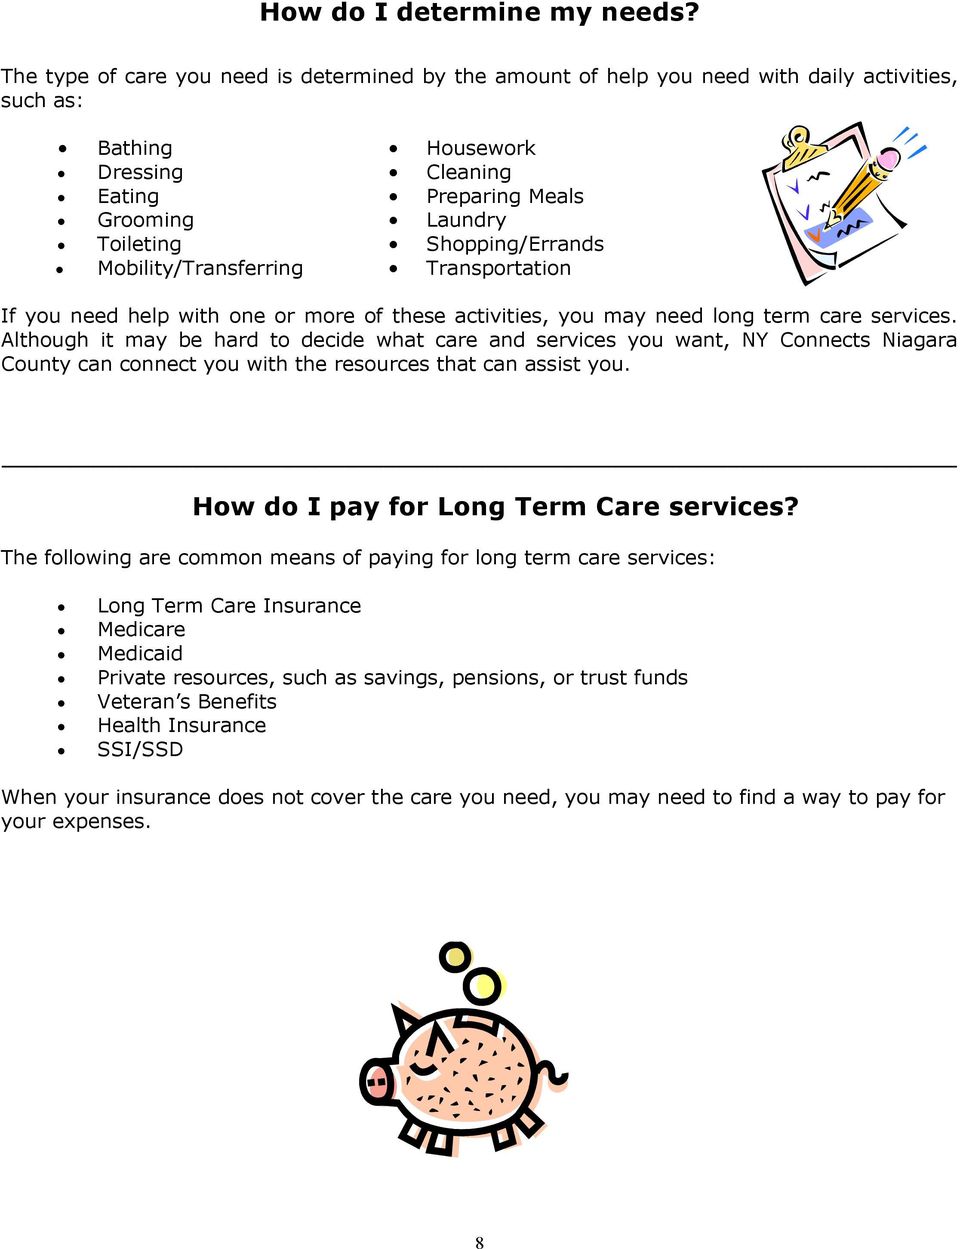 Shopping/Errands Mobility/Transferring Transportation If you need help with one or more of these activities, you may need long term care services.